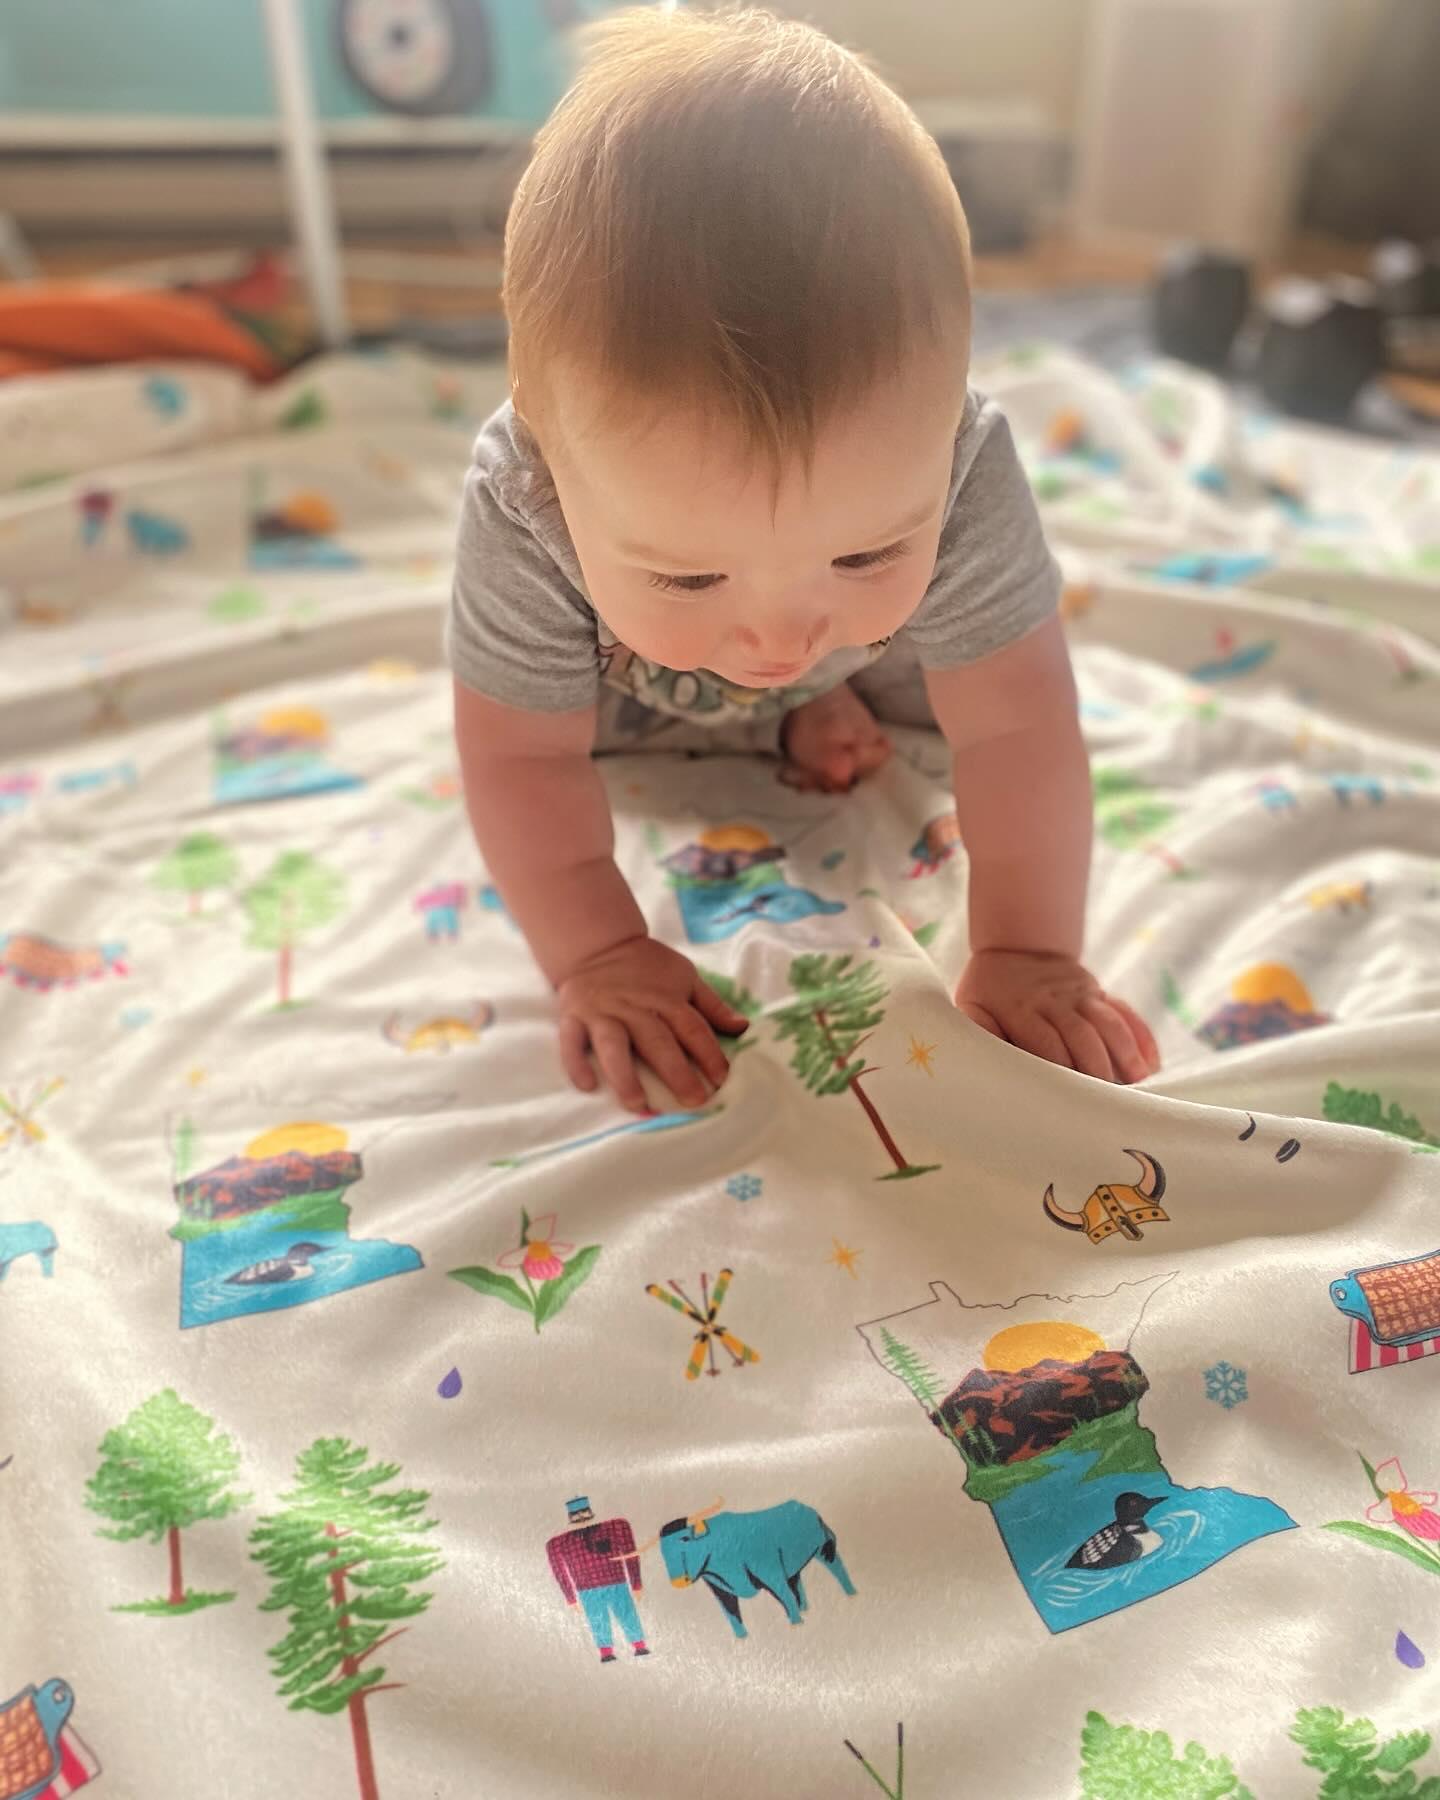 A baby crawling over a Minnesota-themed muslin swaddle blanket, featuring state icons and an outline of the state map